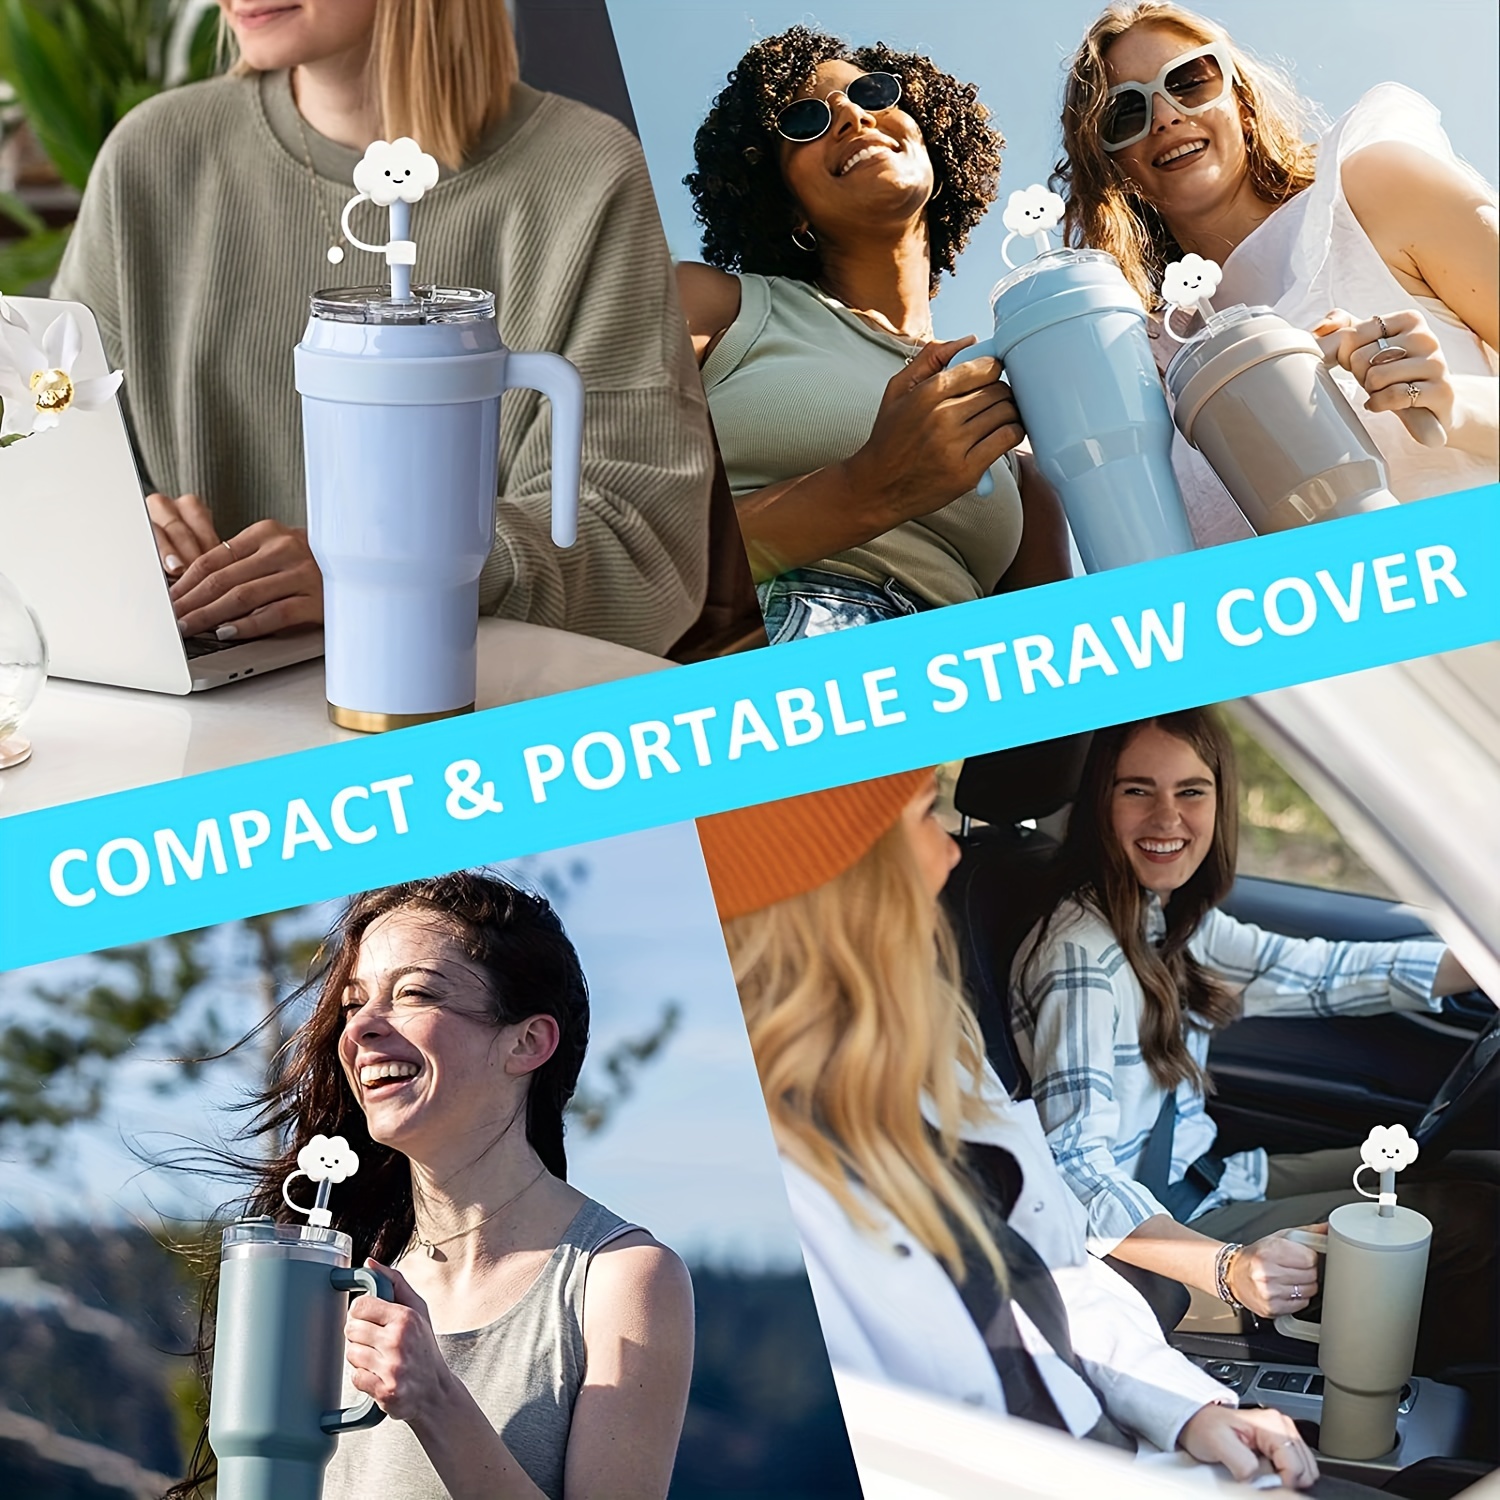 Stanley Straw Cover Cap 3-Pack for $2.99